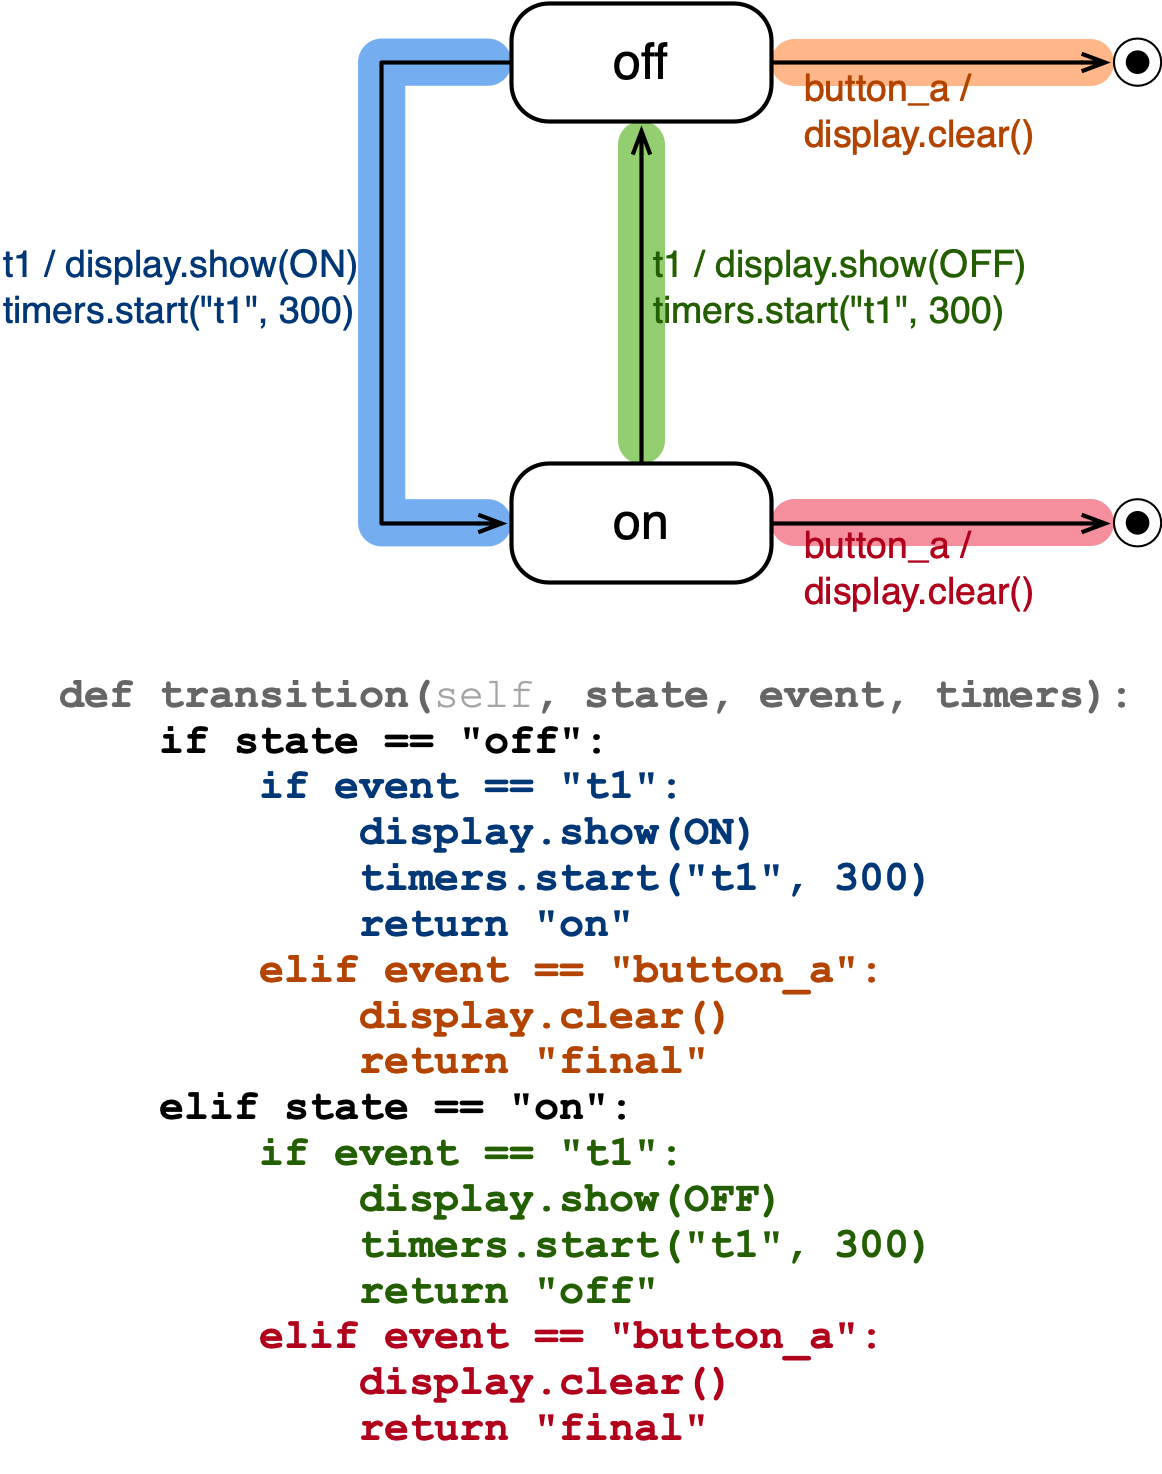 State machine diagram and the corresponding transition function. Colors in the diagram correspond to the colored code sections.